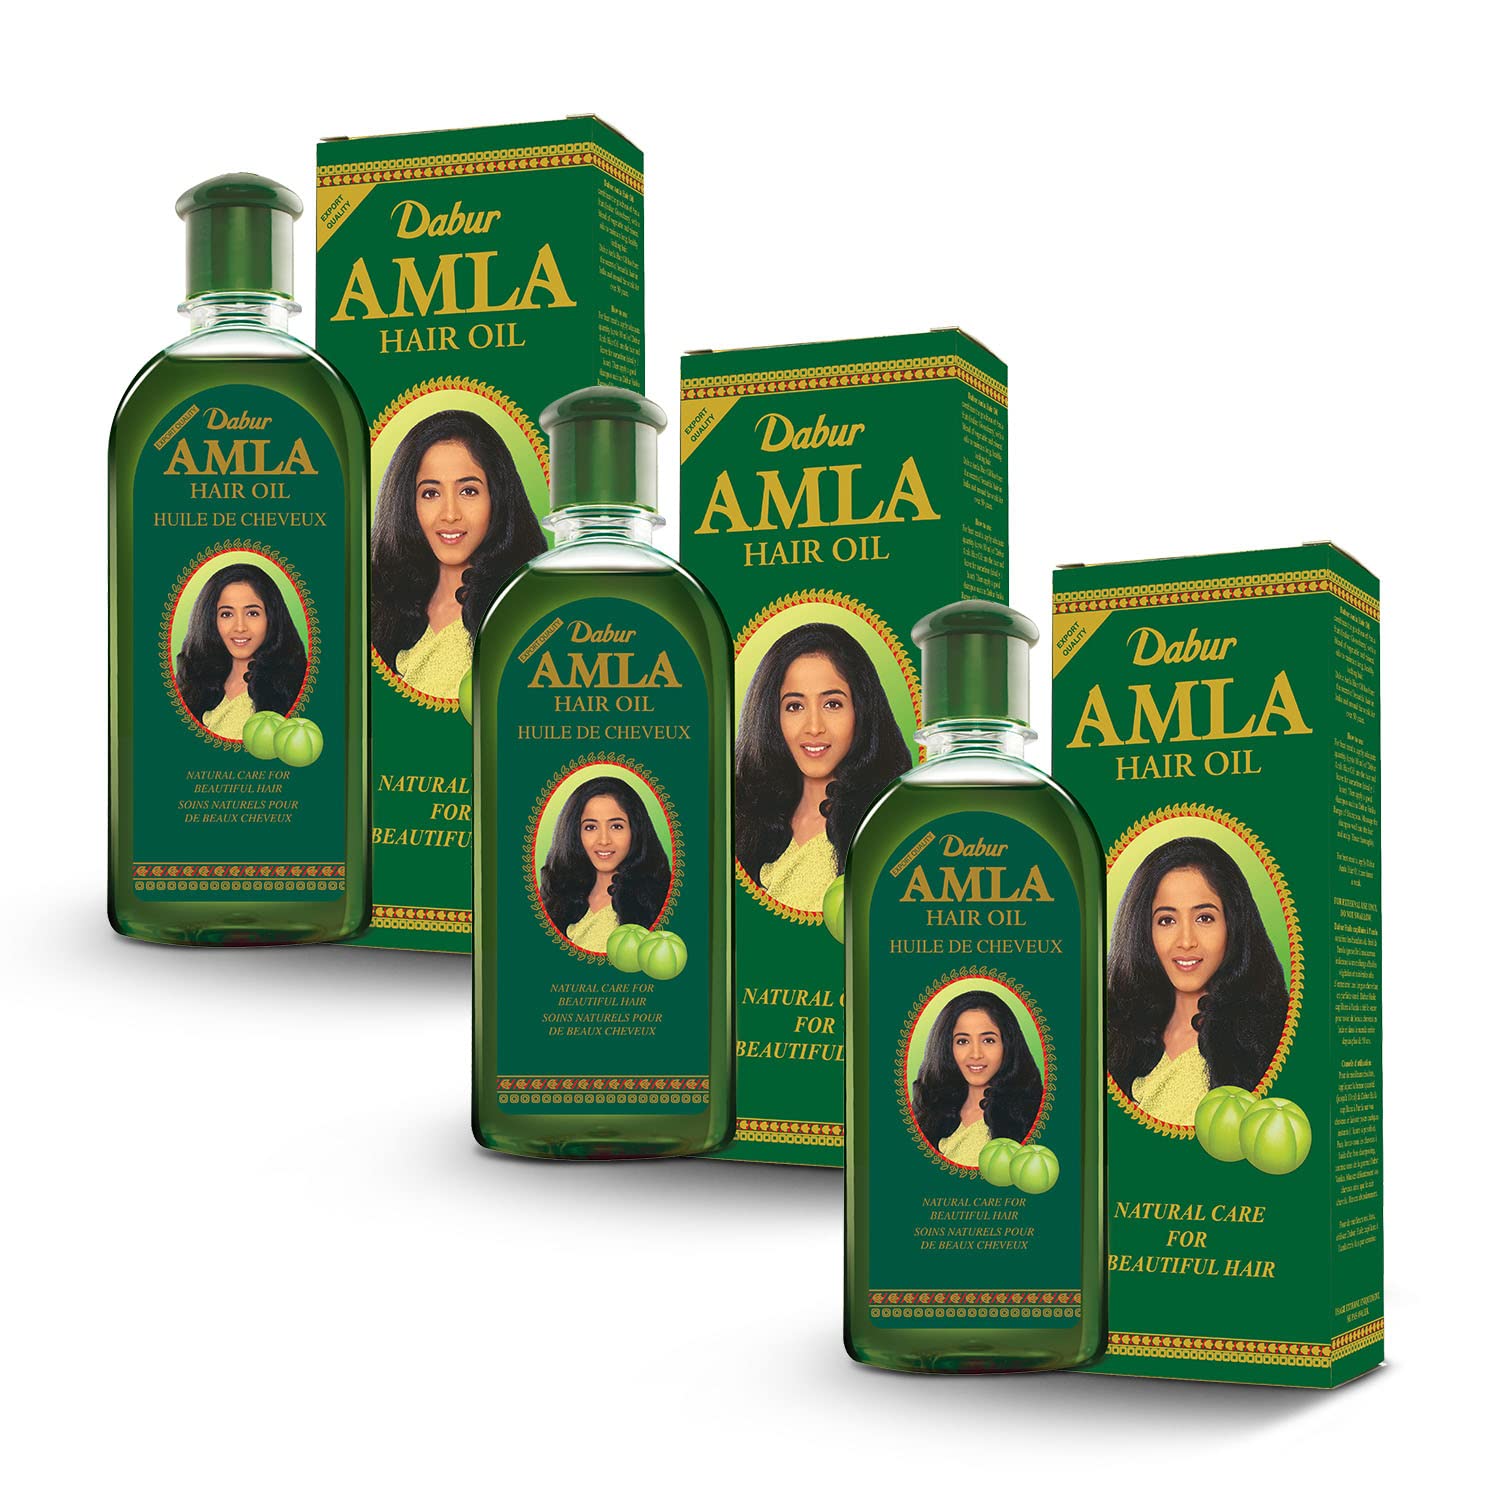 Dabur Amla Hair Oil - Amla Oil, Amla Hair Oil, Amla Oil for Healthy Hair and Moisturized Scalp, Indian Hair Oil for Men and Women, Bio Oil for Hair, Natural Care for Beautiful Hair (500ml, Pack of 3)